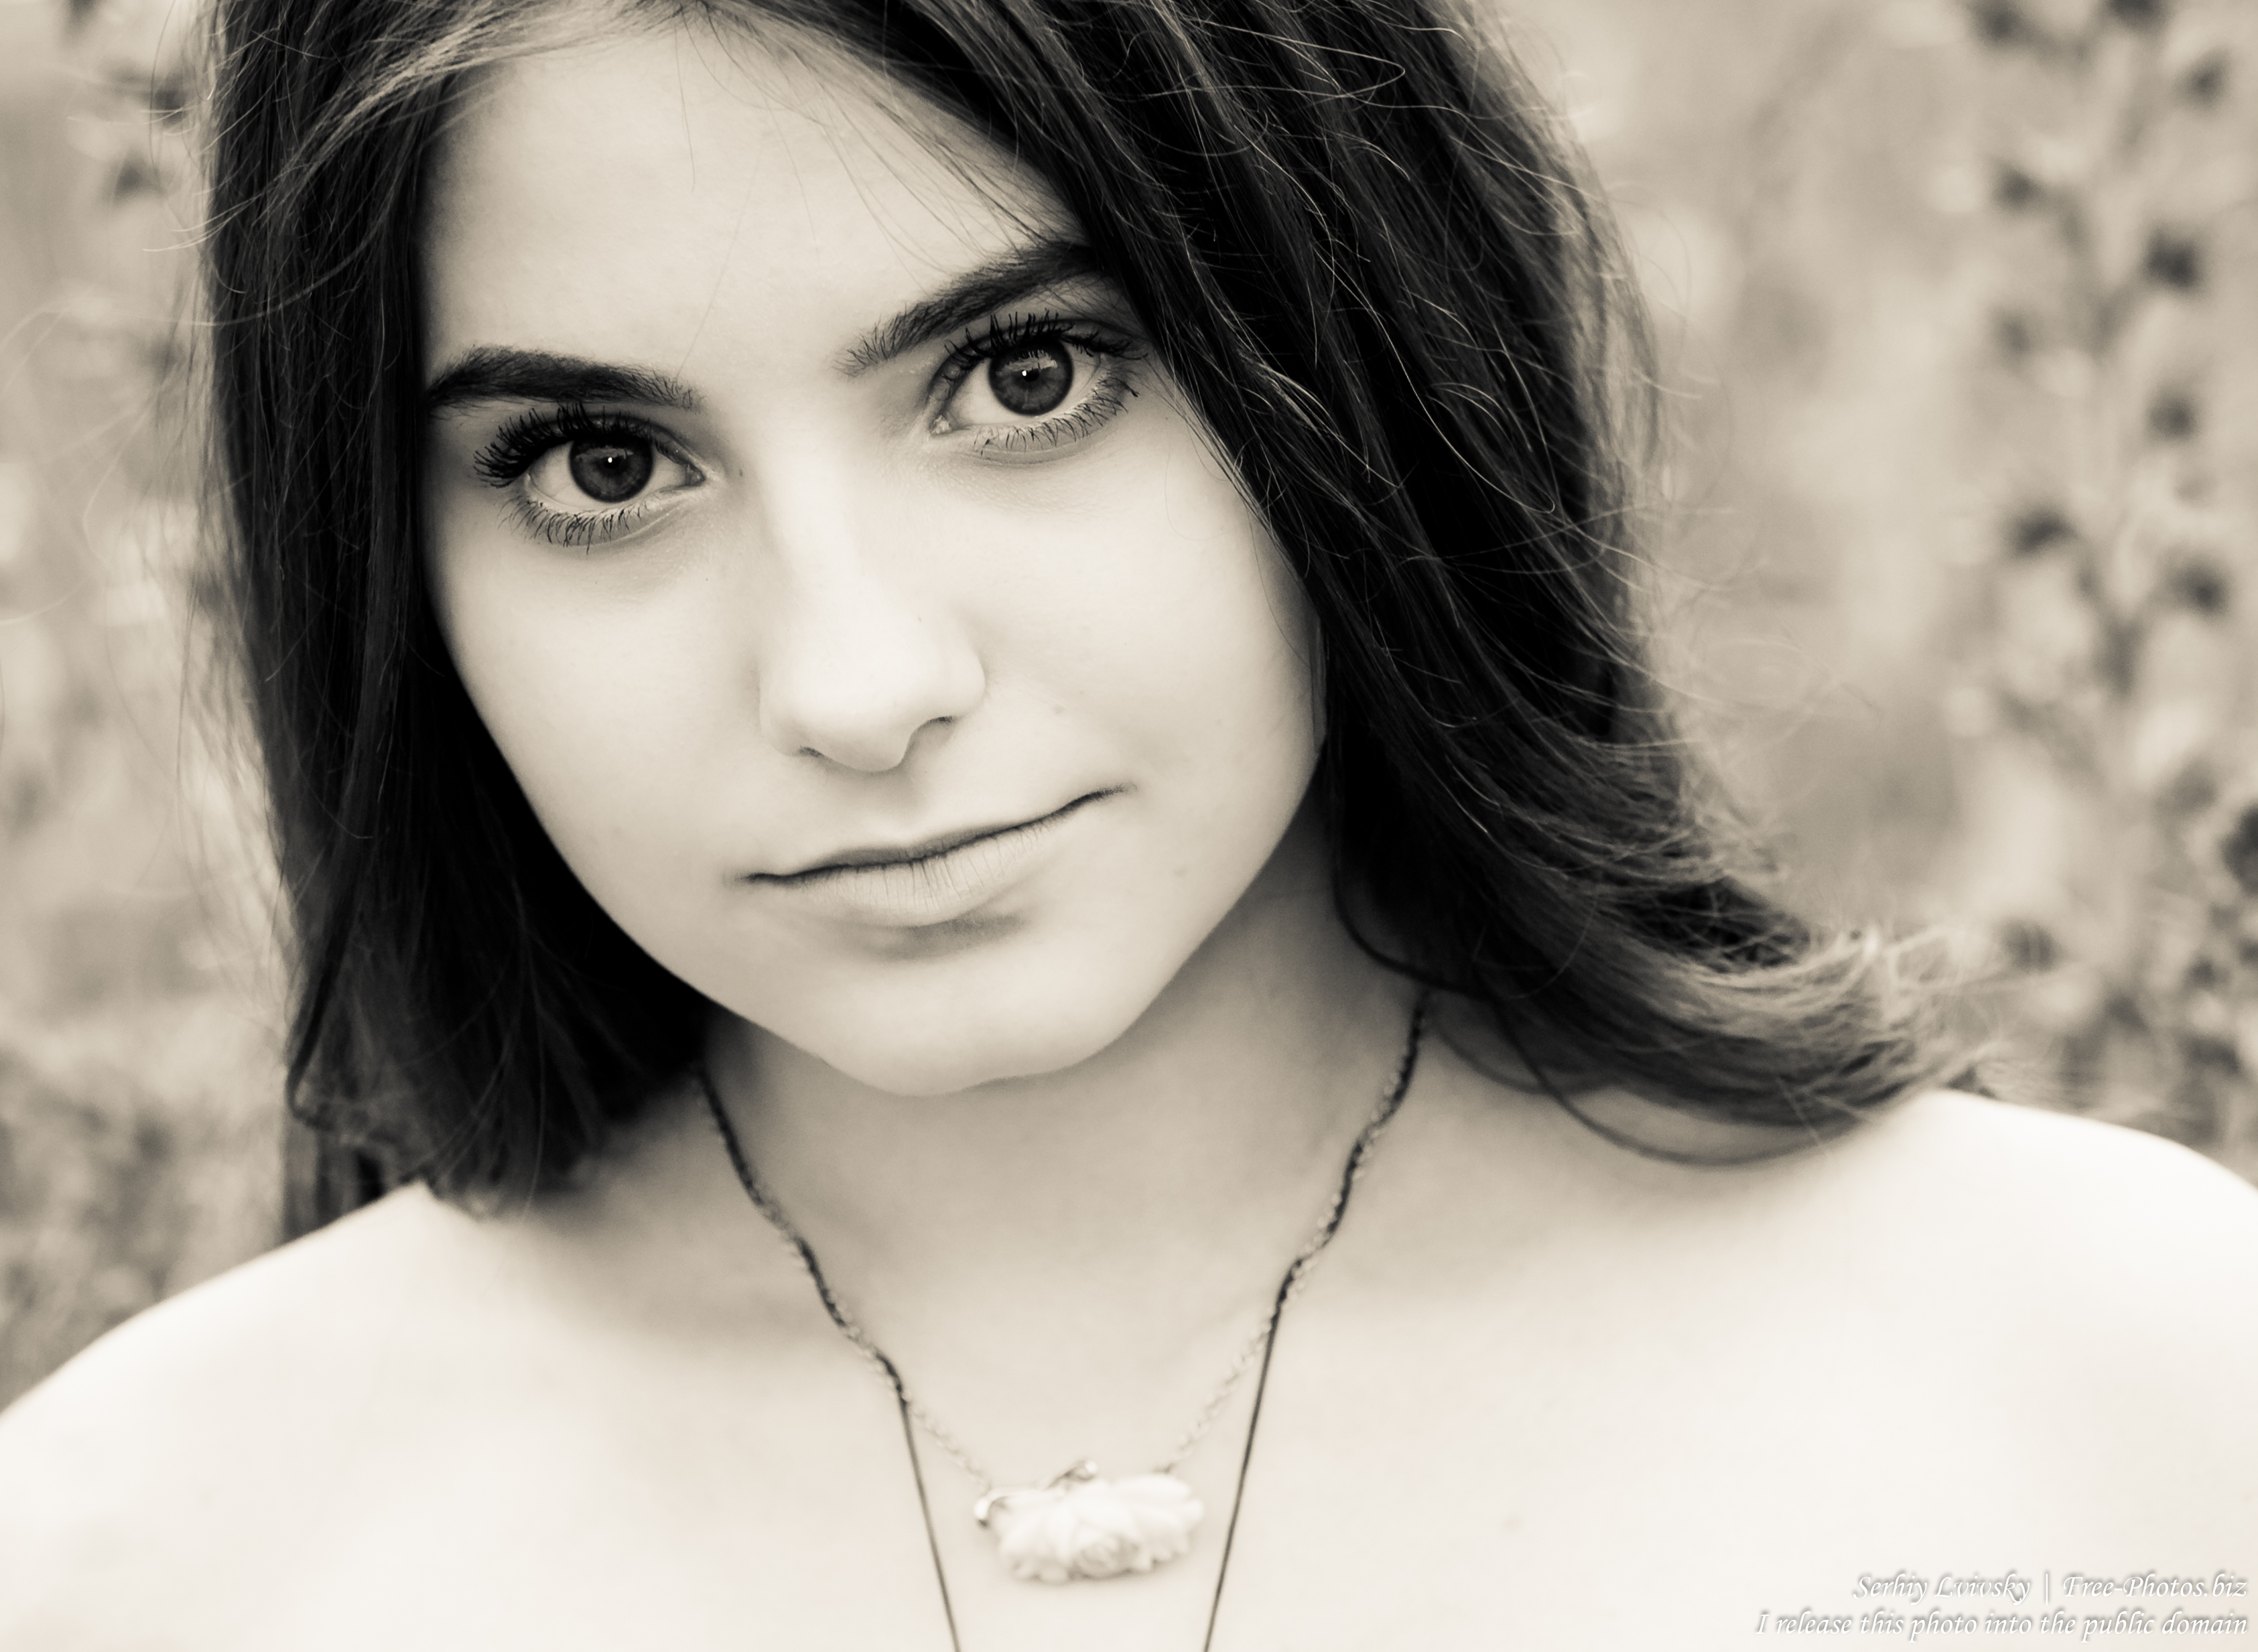 a 15-year-old girl photographed in June 2016, black and white